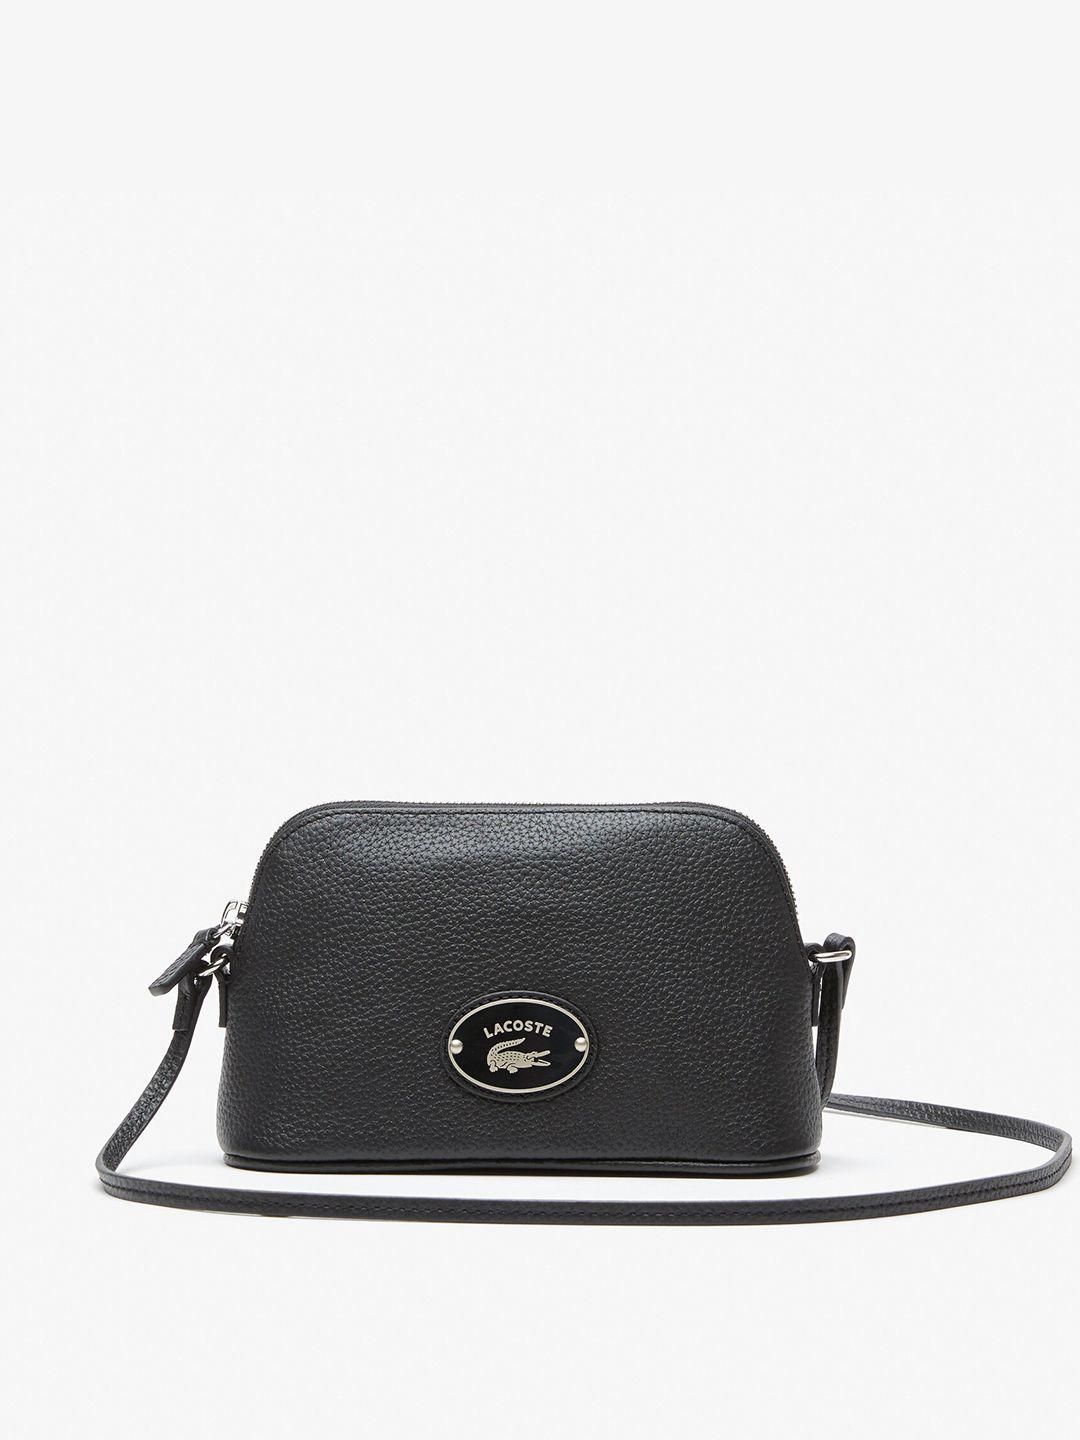 lacoste-women-leather-dome-crossover-bag